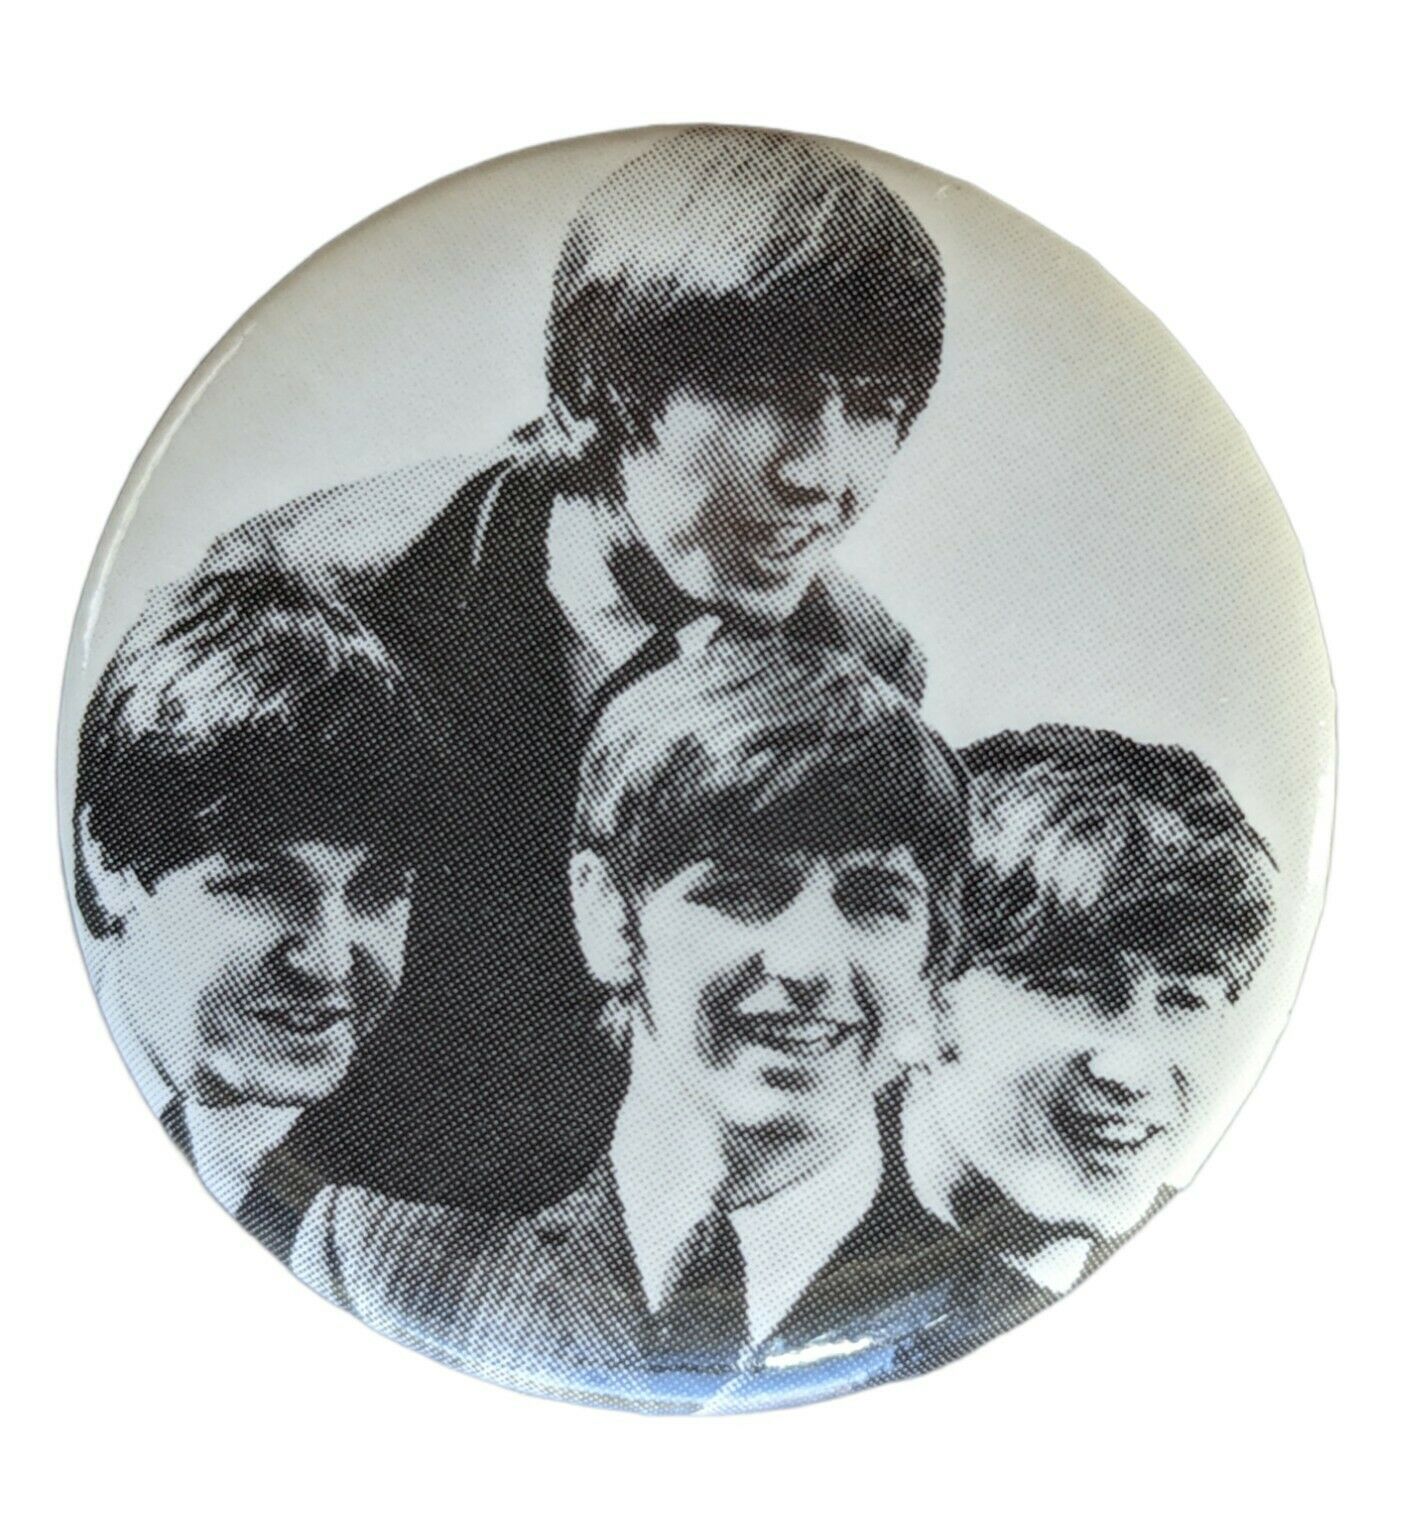 Vintage The Beatles Band 1960's Music Black And White Pin-back Pin Button Rock